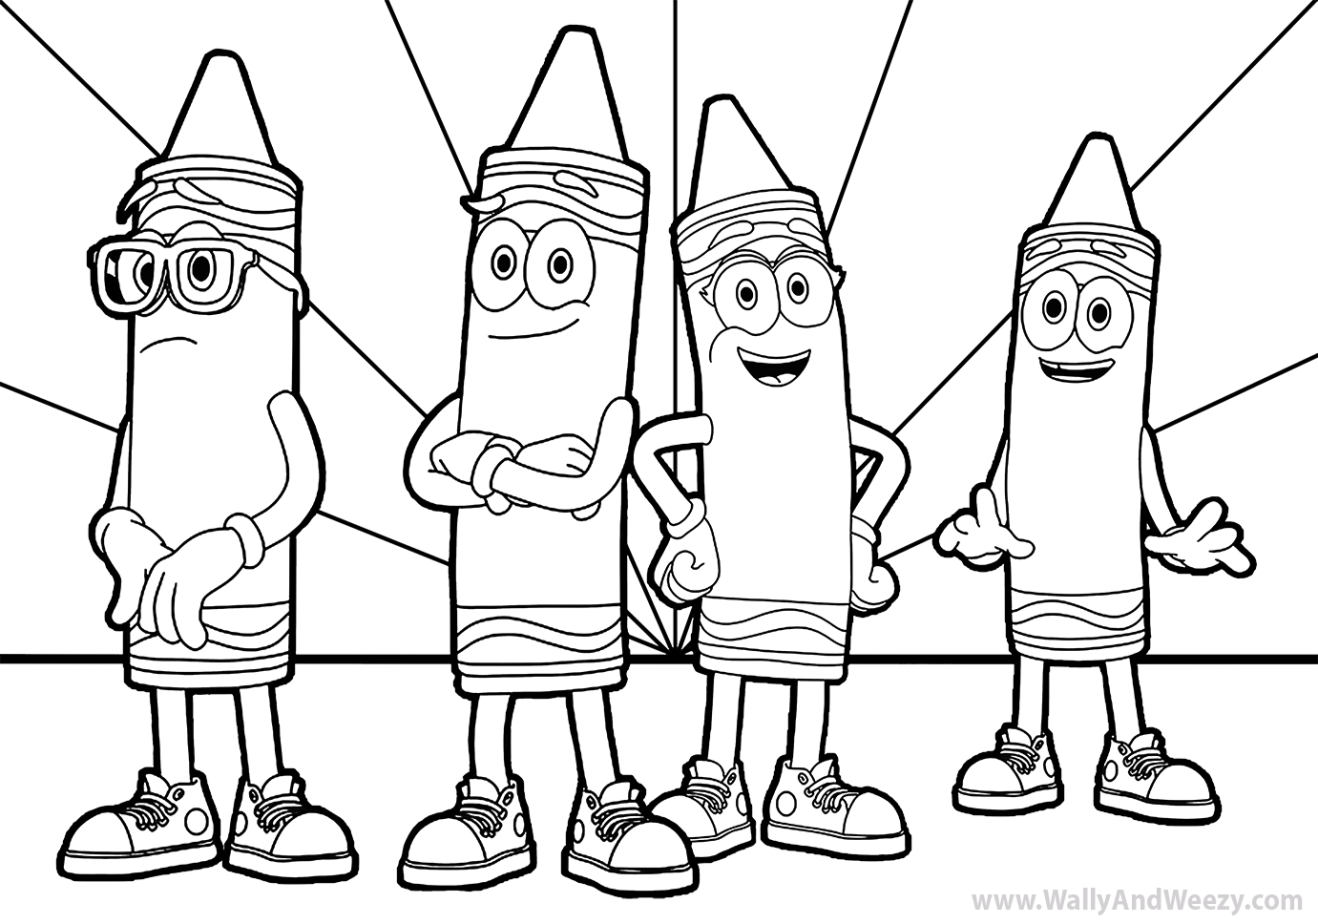 Coloring Pages Archives - Wally And Weezy - Coloring Home